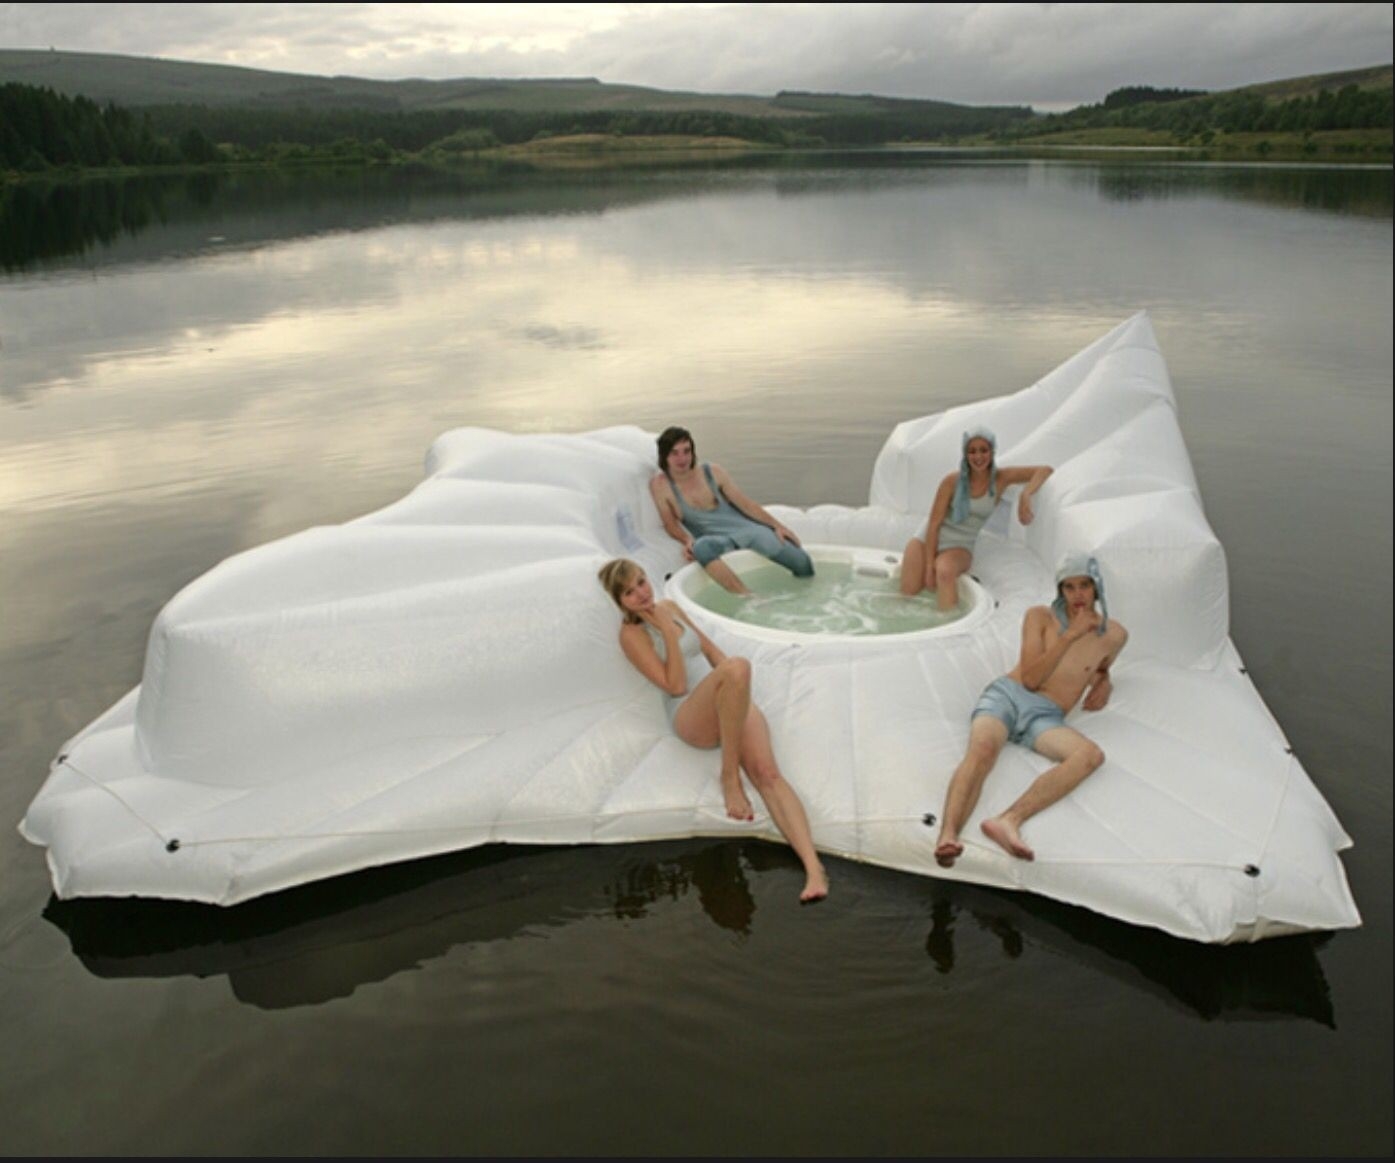 https://foter.com/photos/title/cool-pool-floats-for-adults.jpg